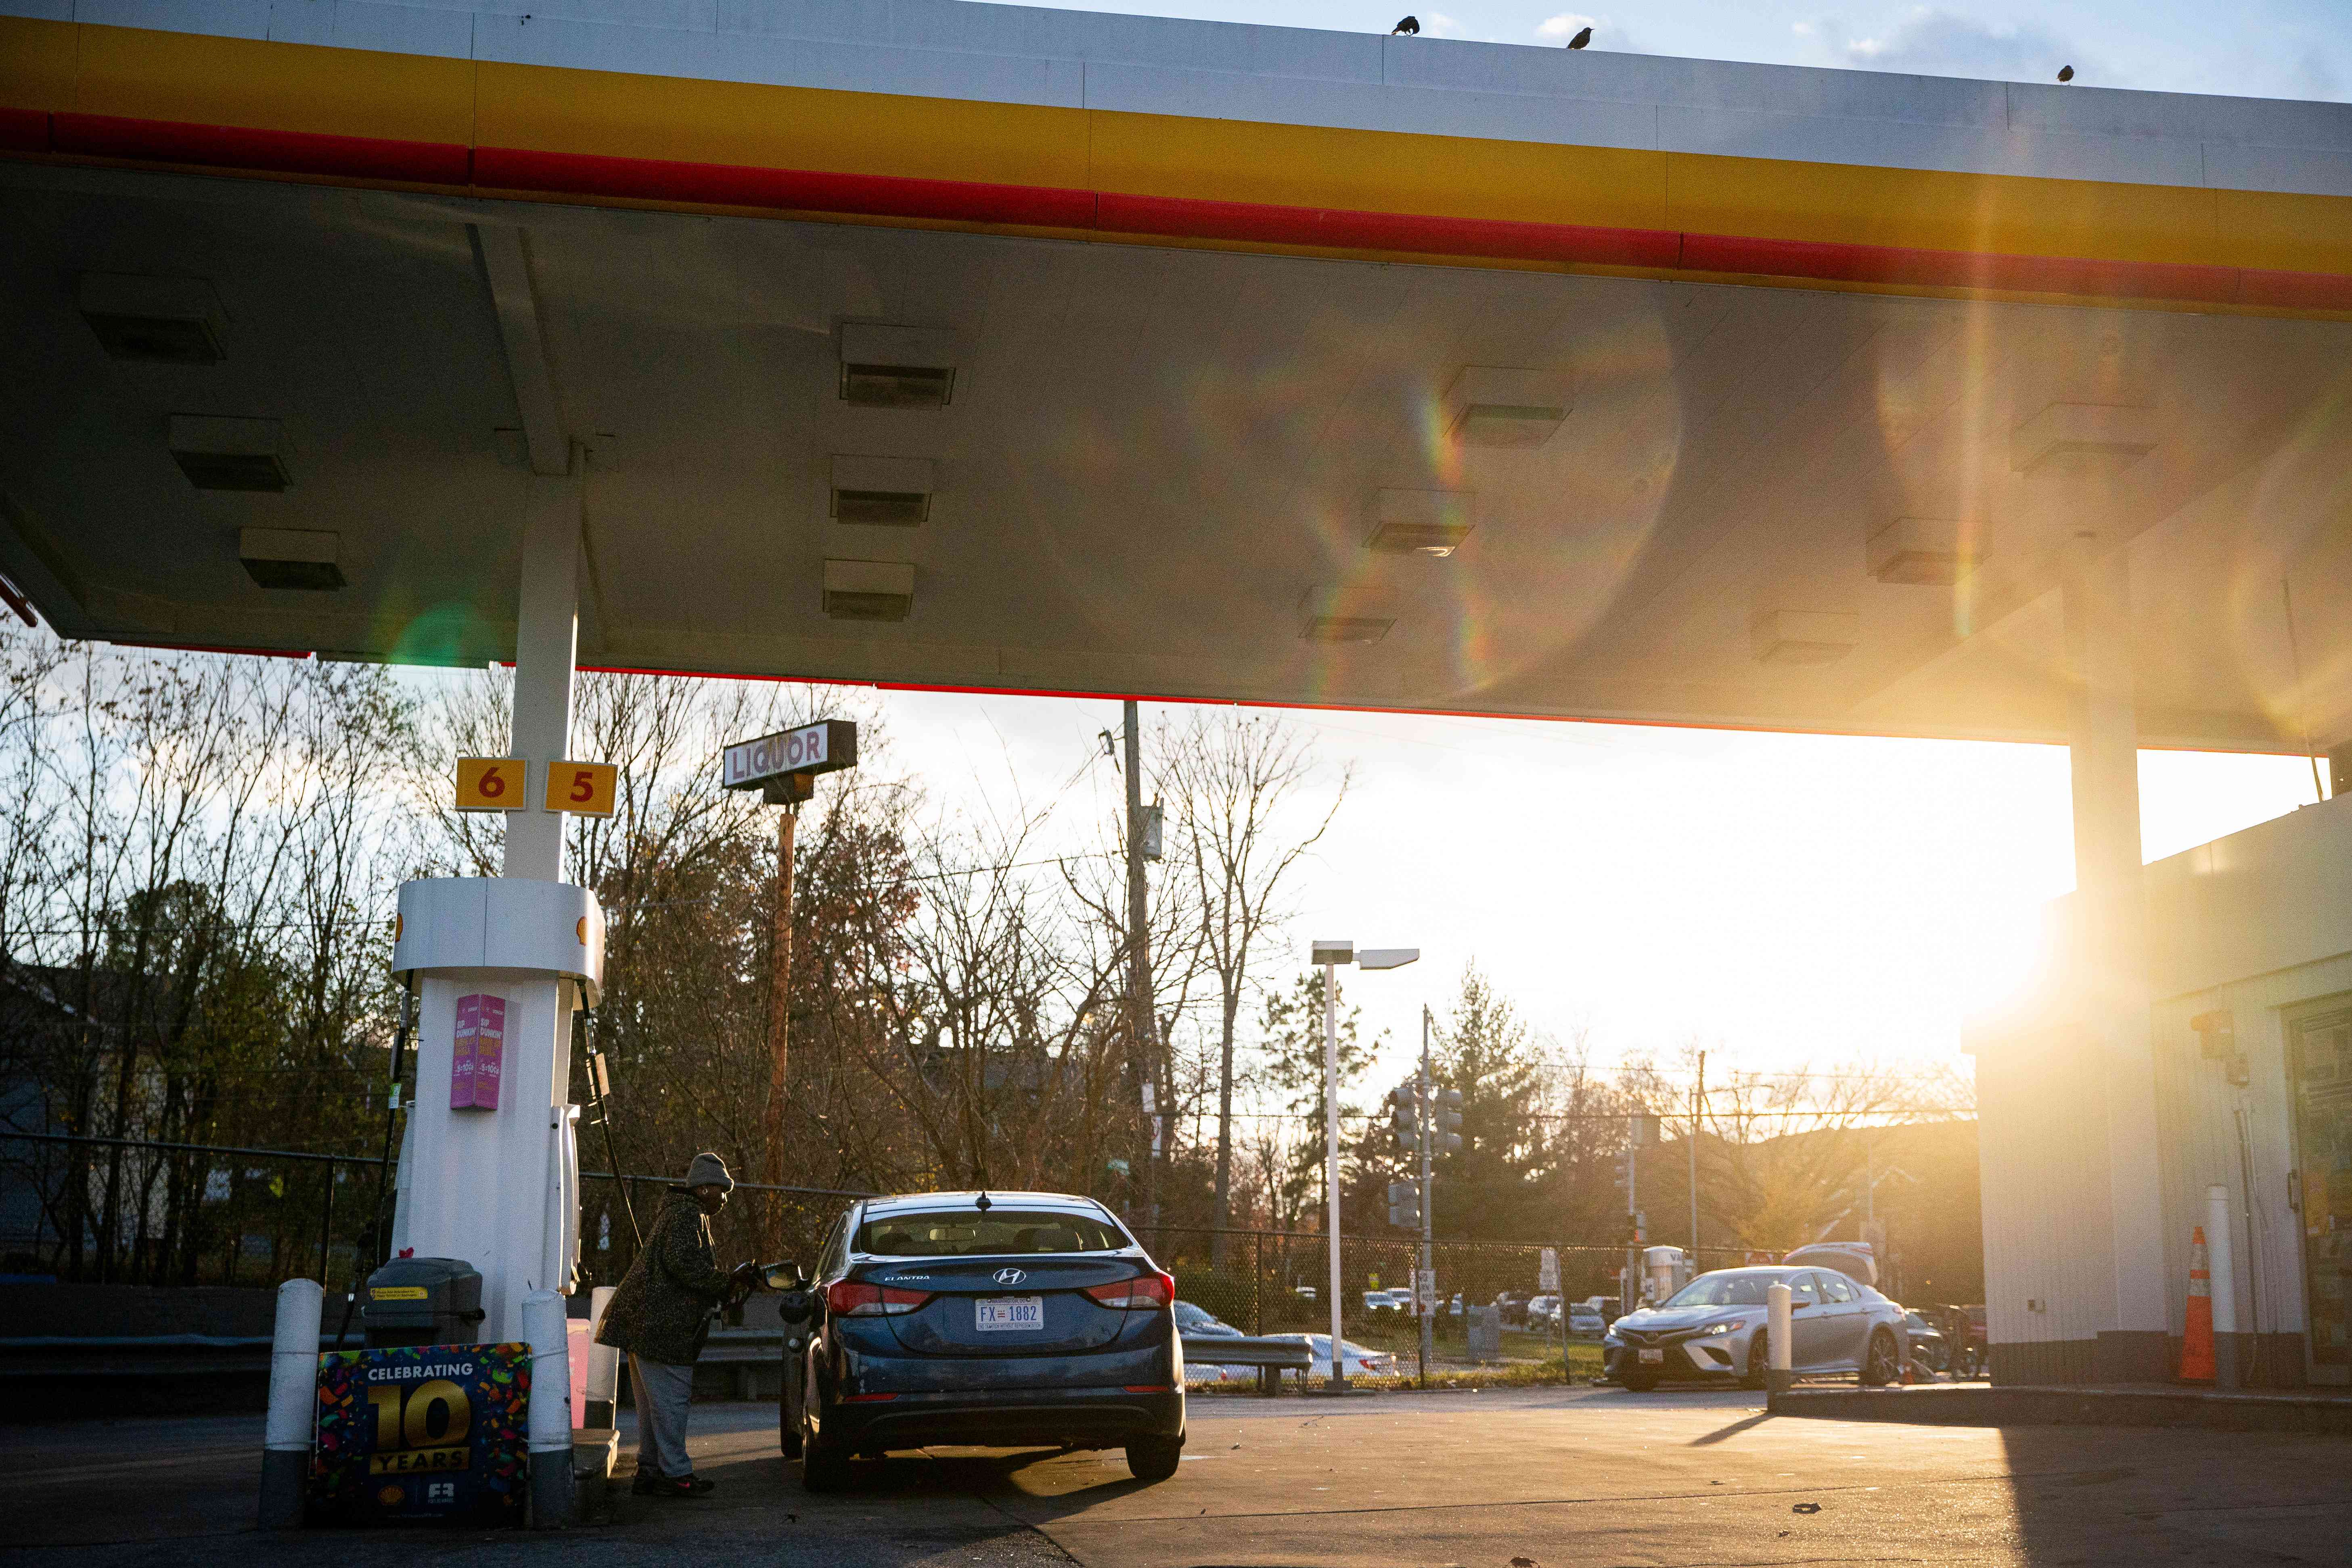 A driver pumps gas at a Shell gas station in Washington, DC, US, on Tuesday, Nov. 28, 203. Gasoline prices have fallen for 60 consecutive days, the longest streak of declines in more than a year, letting American drivers pass on savings at the pump to consumer retailers during the US economy's all-important holiday season.